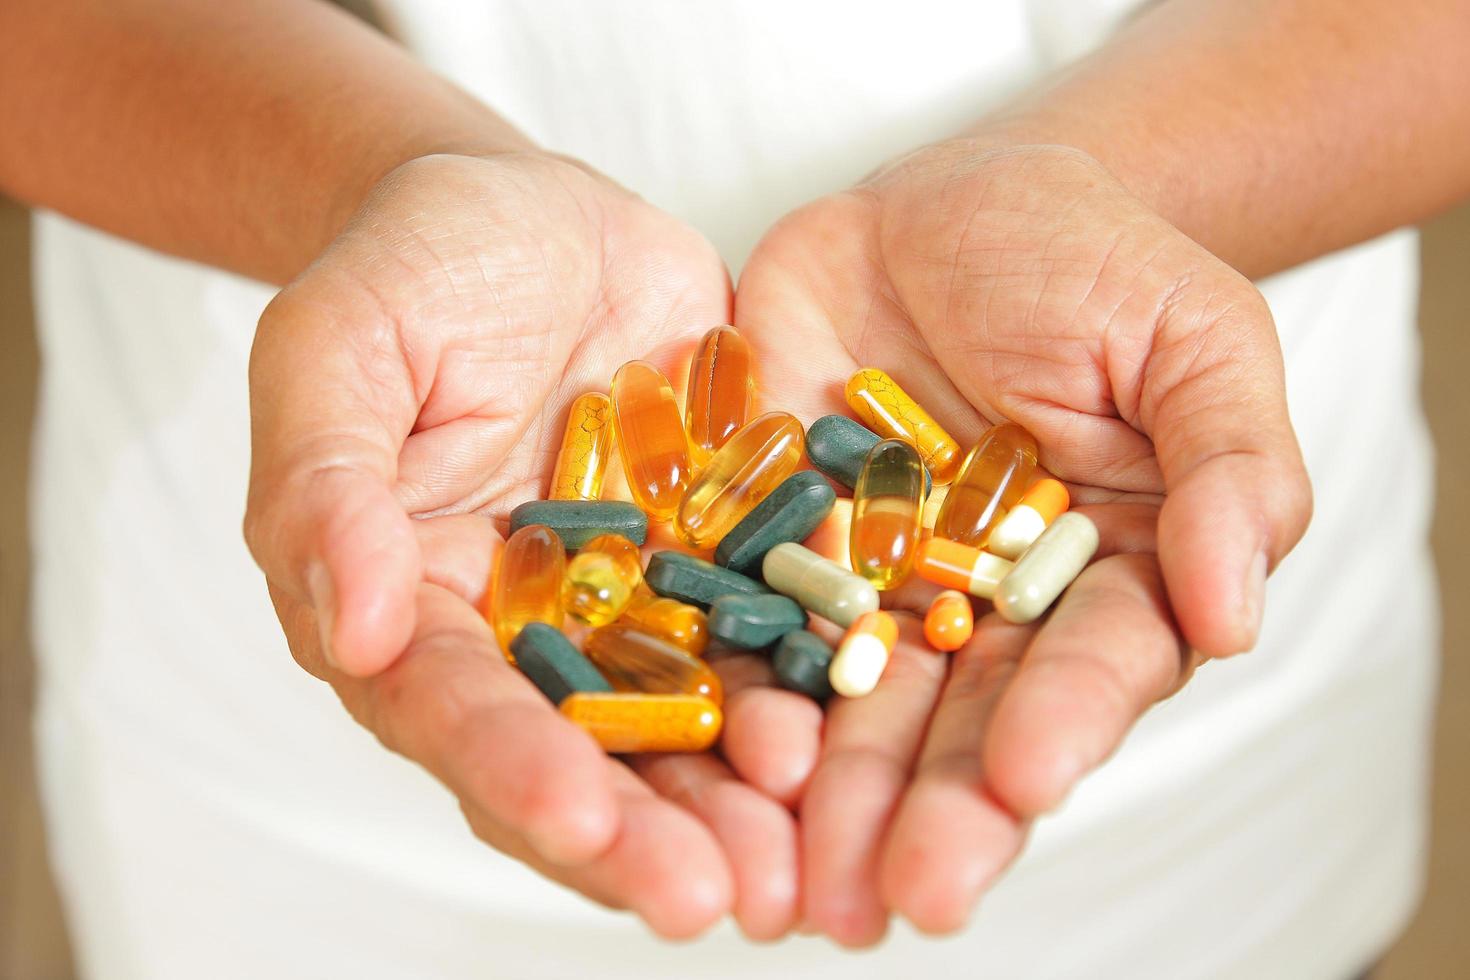 Medication in the hands of the elderly. photo